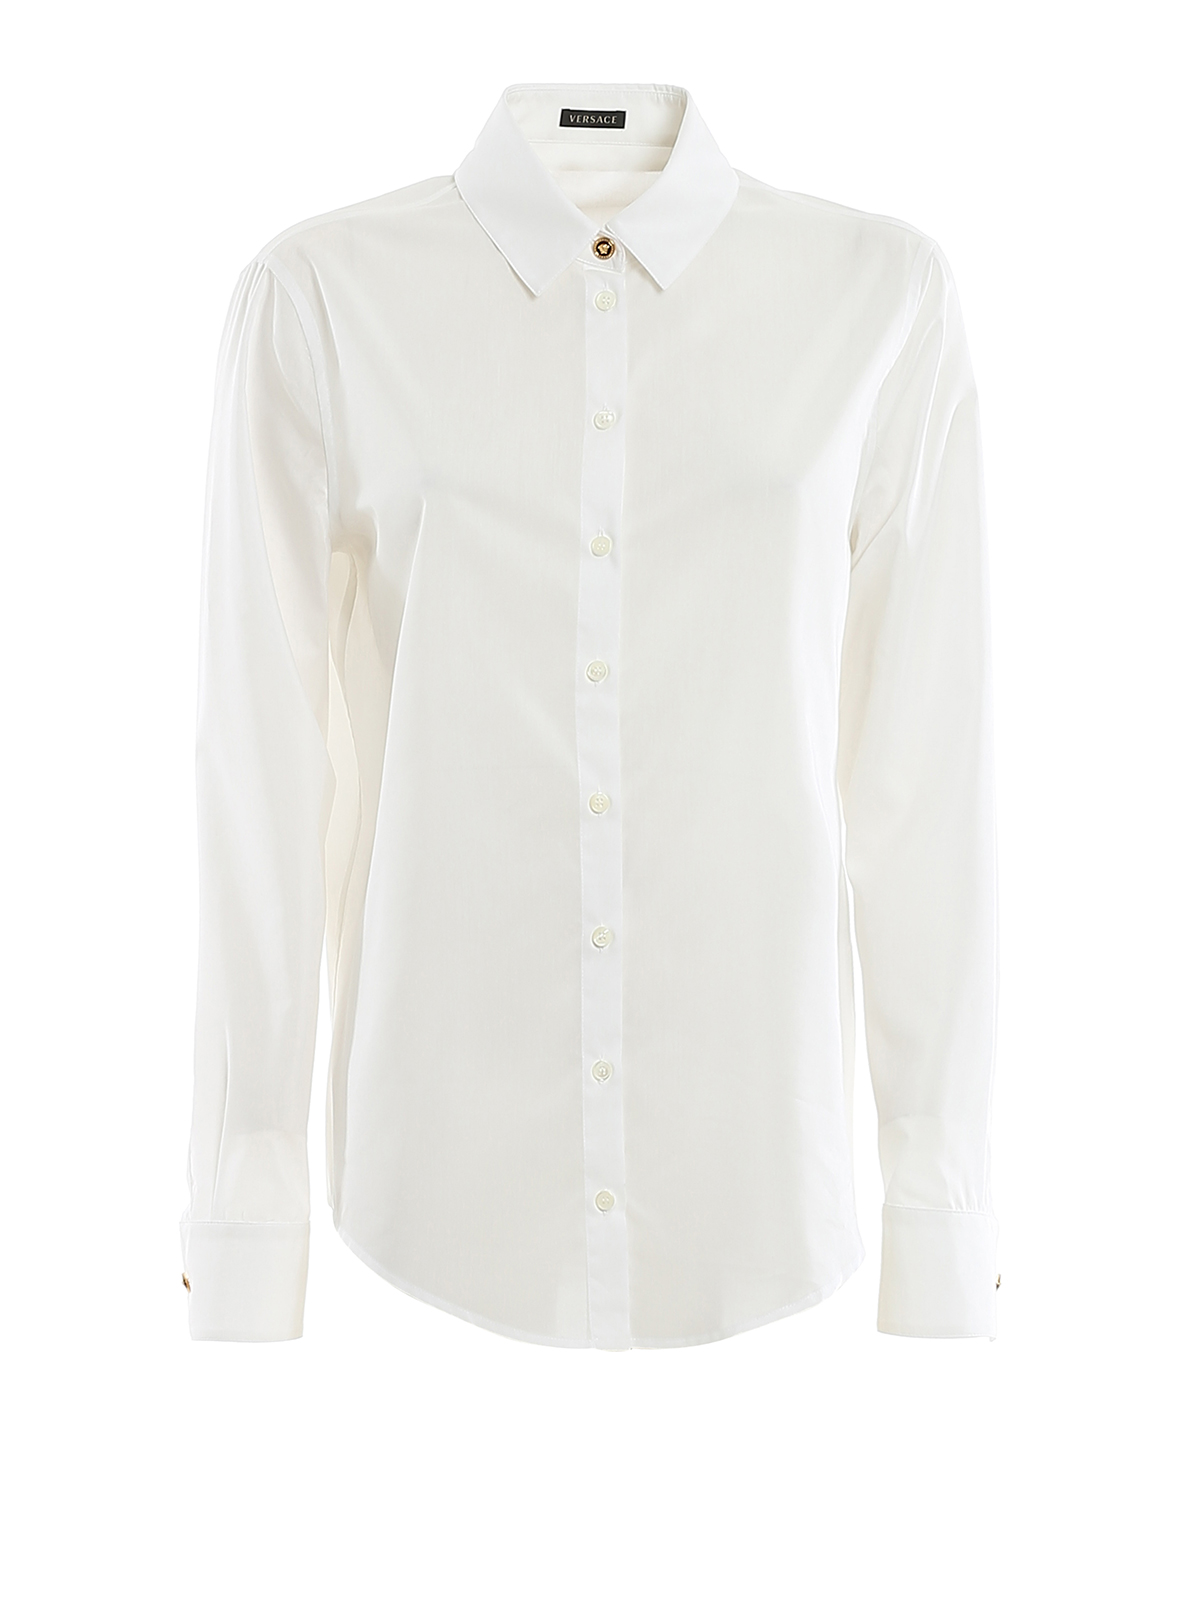 versace white button up